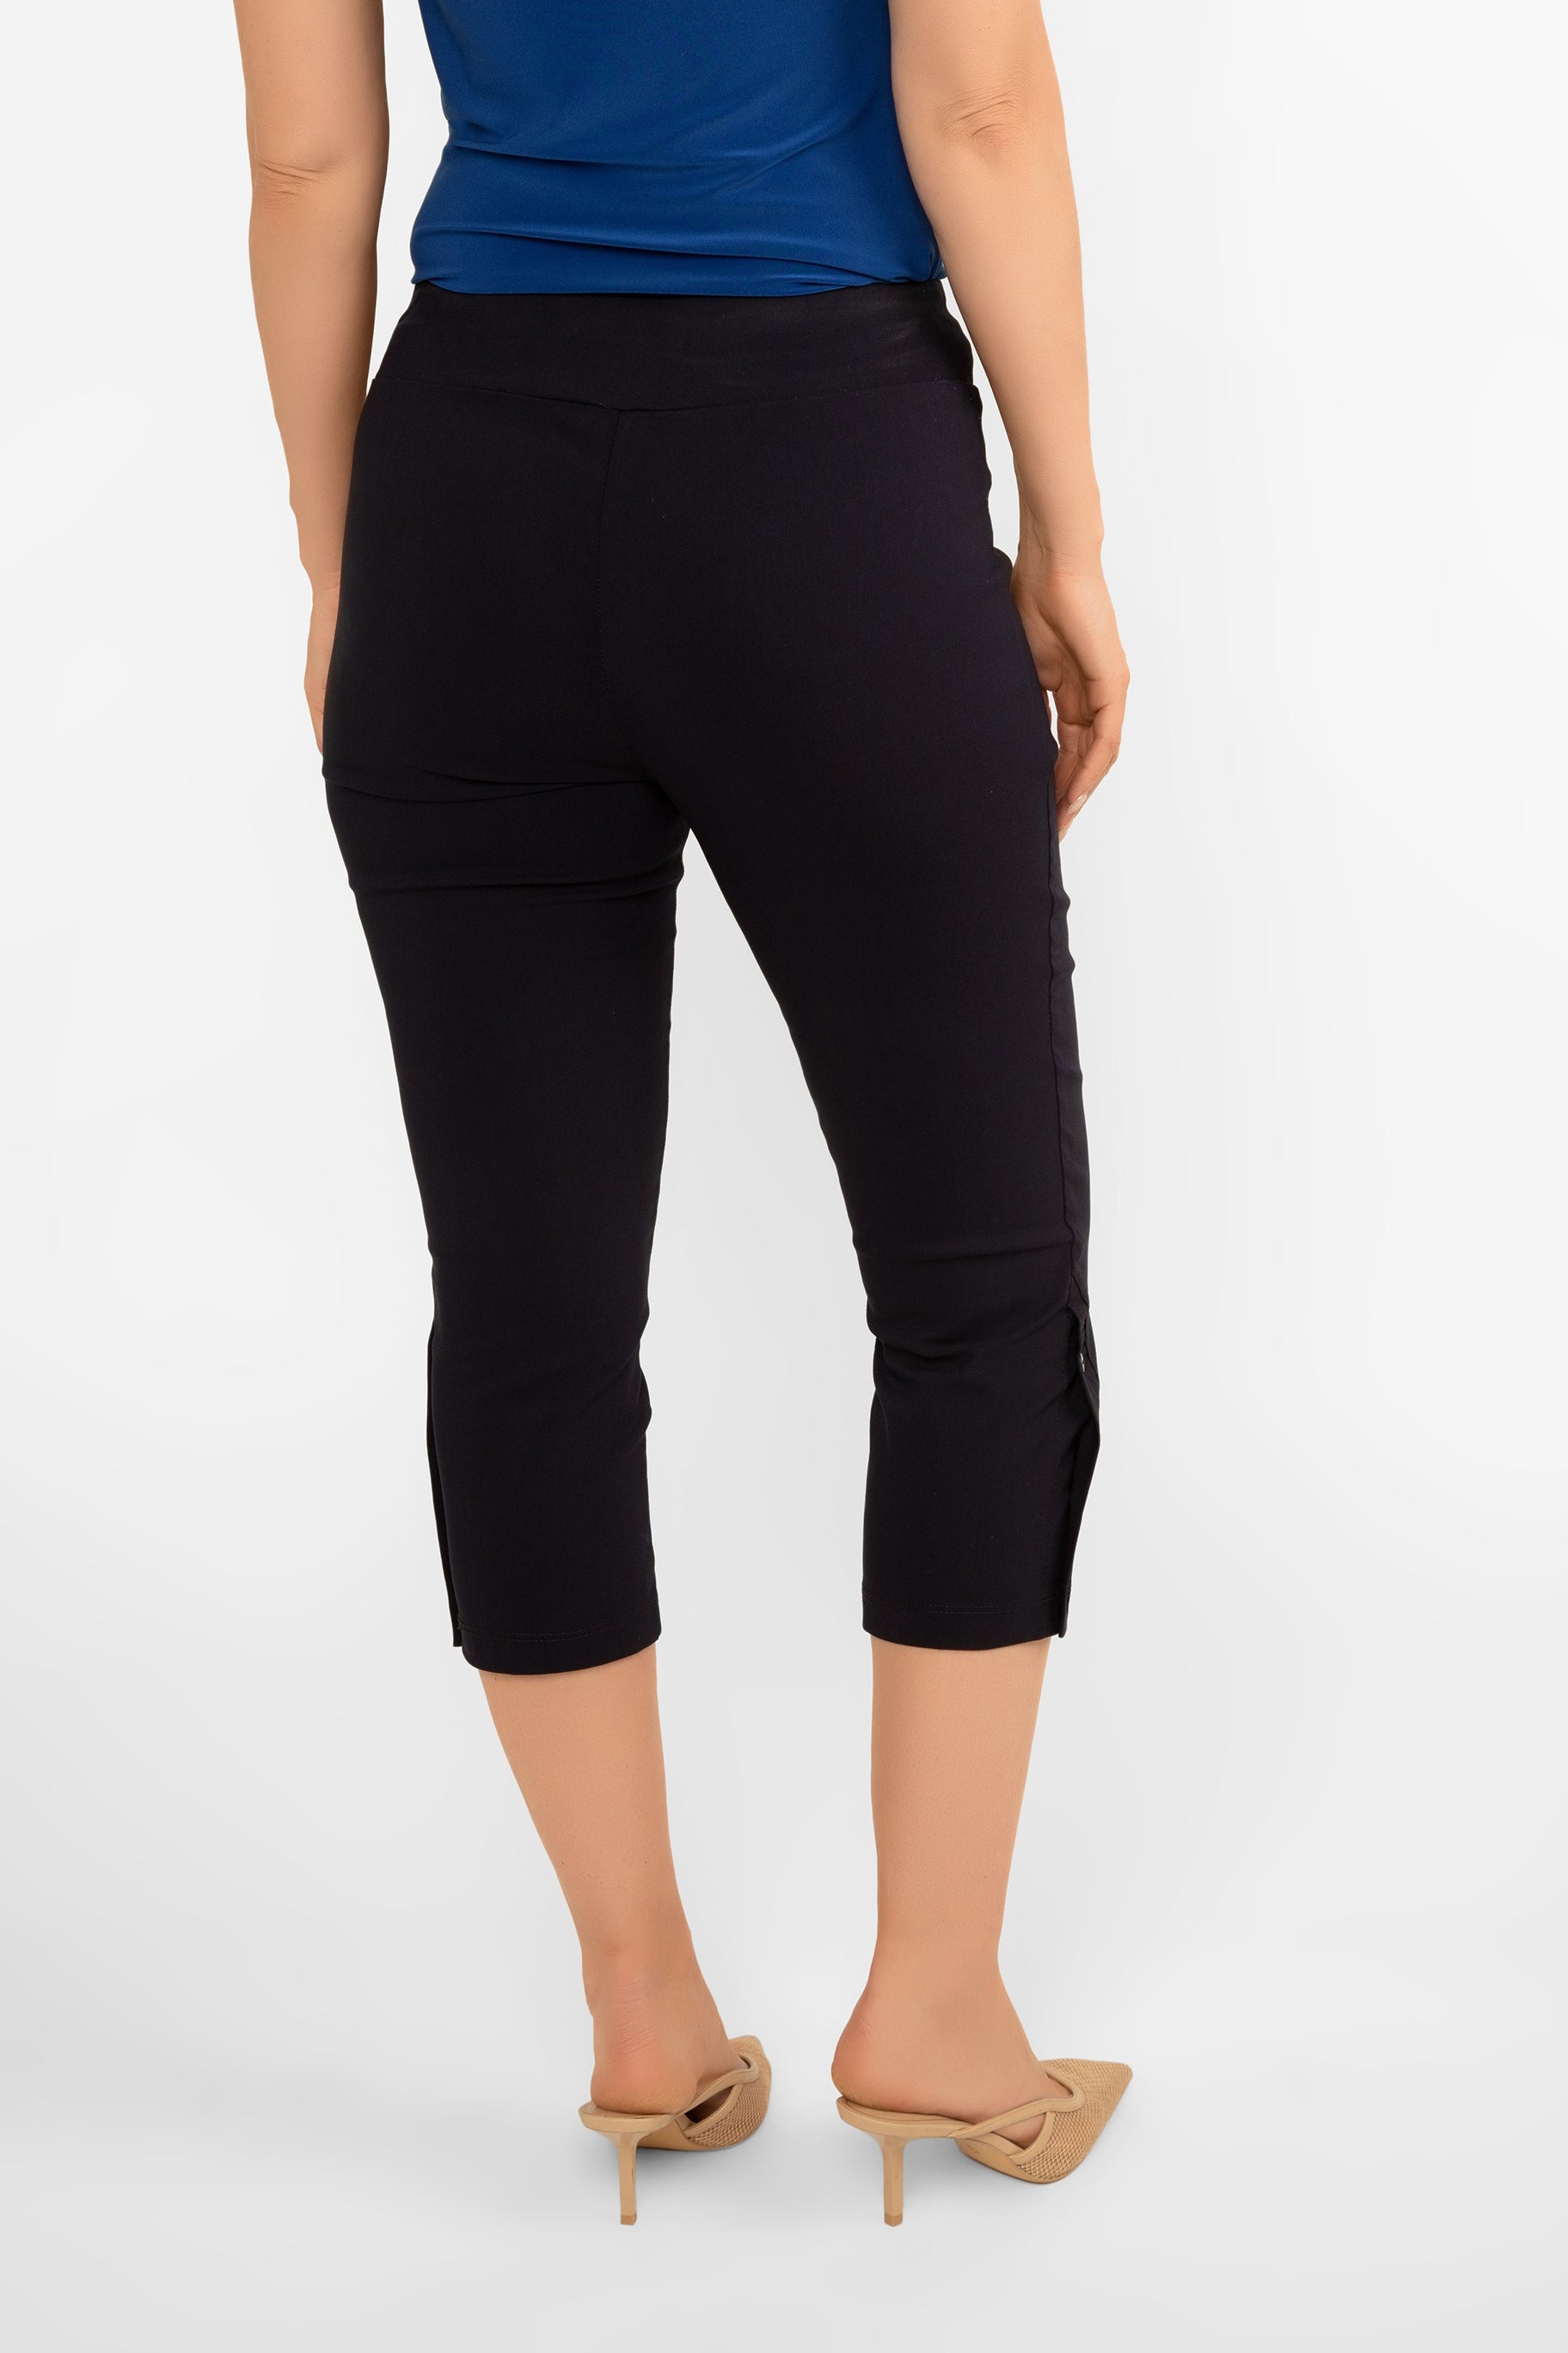 Back view of Picadilly (F M959 PR)  Women's Slim Fit Capris with button trim on hem in Capris  BluePicadilly (F M959 PR Women's Slim Fit Capris with button trim on hem in Navy